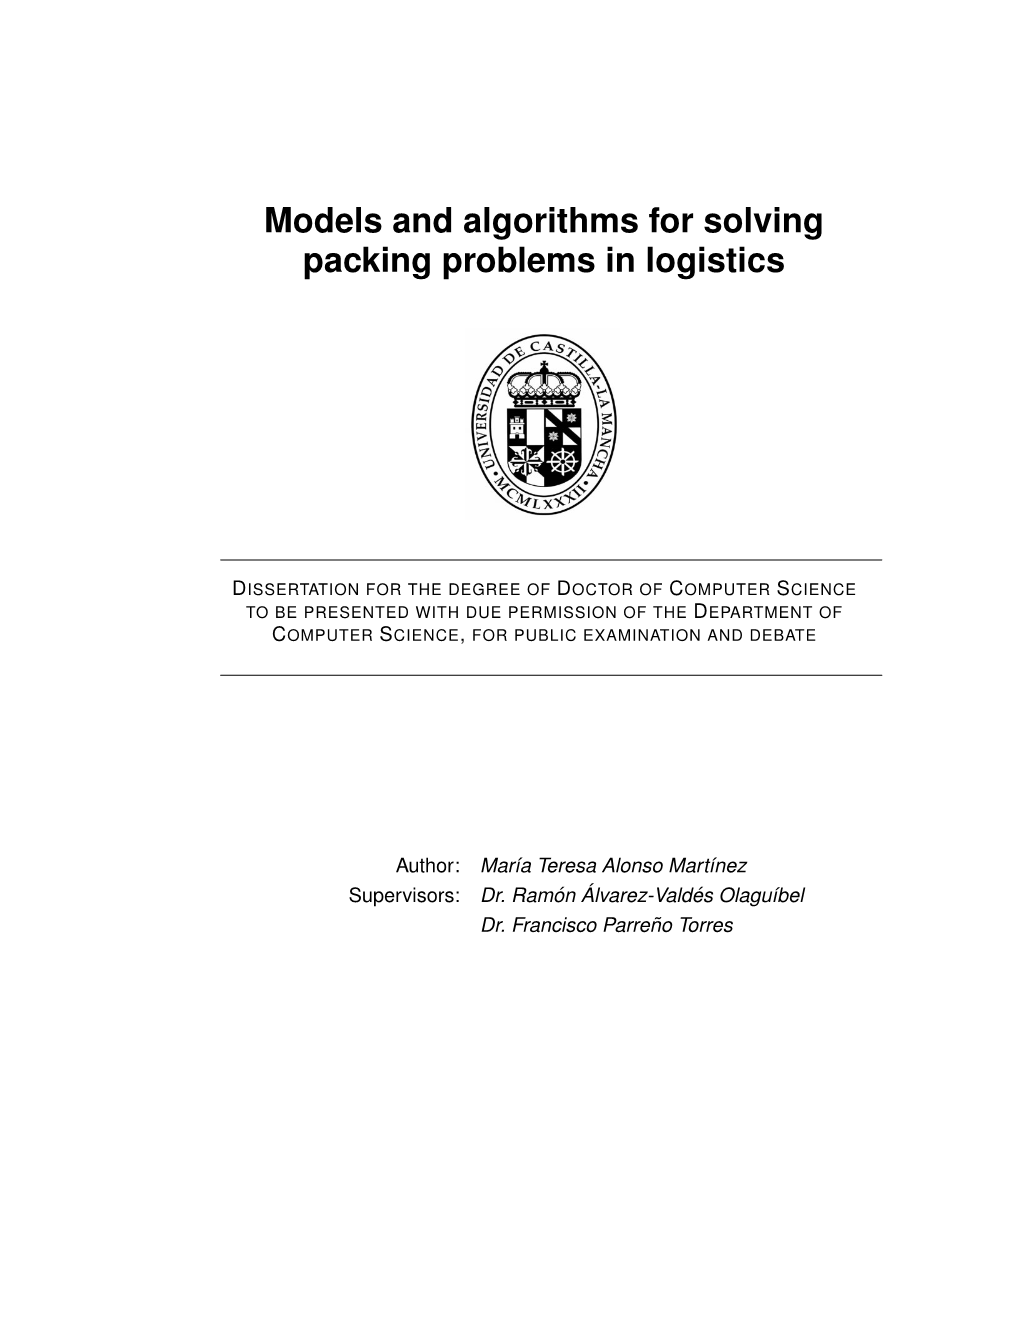 Models and Algorithms for Solving Packing Problems in Logistics